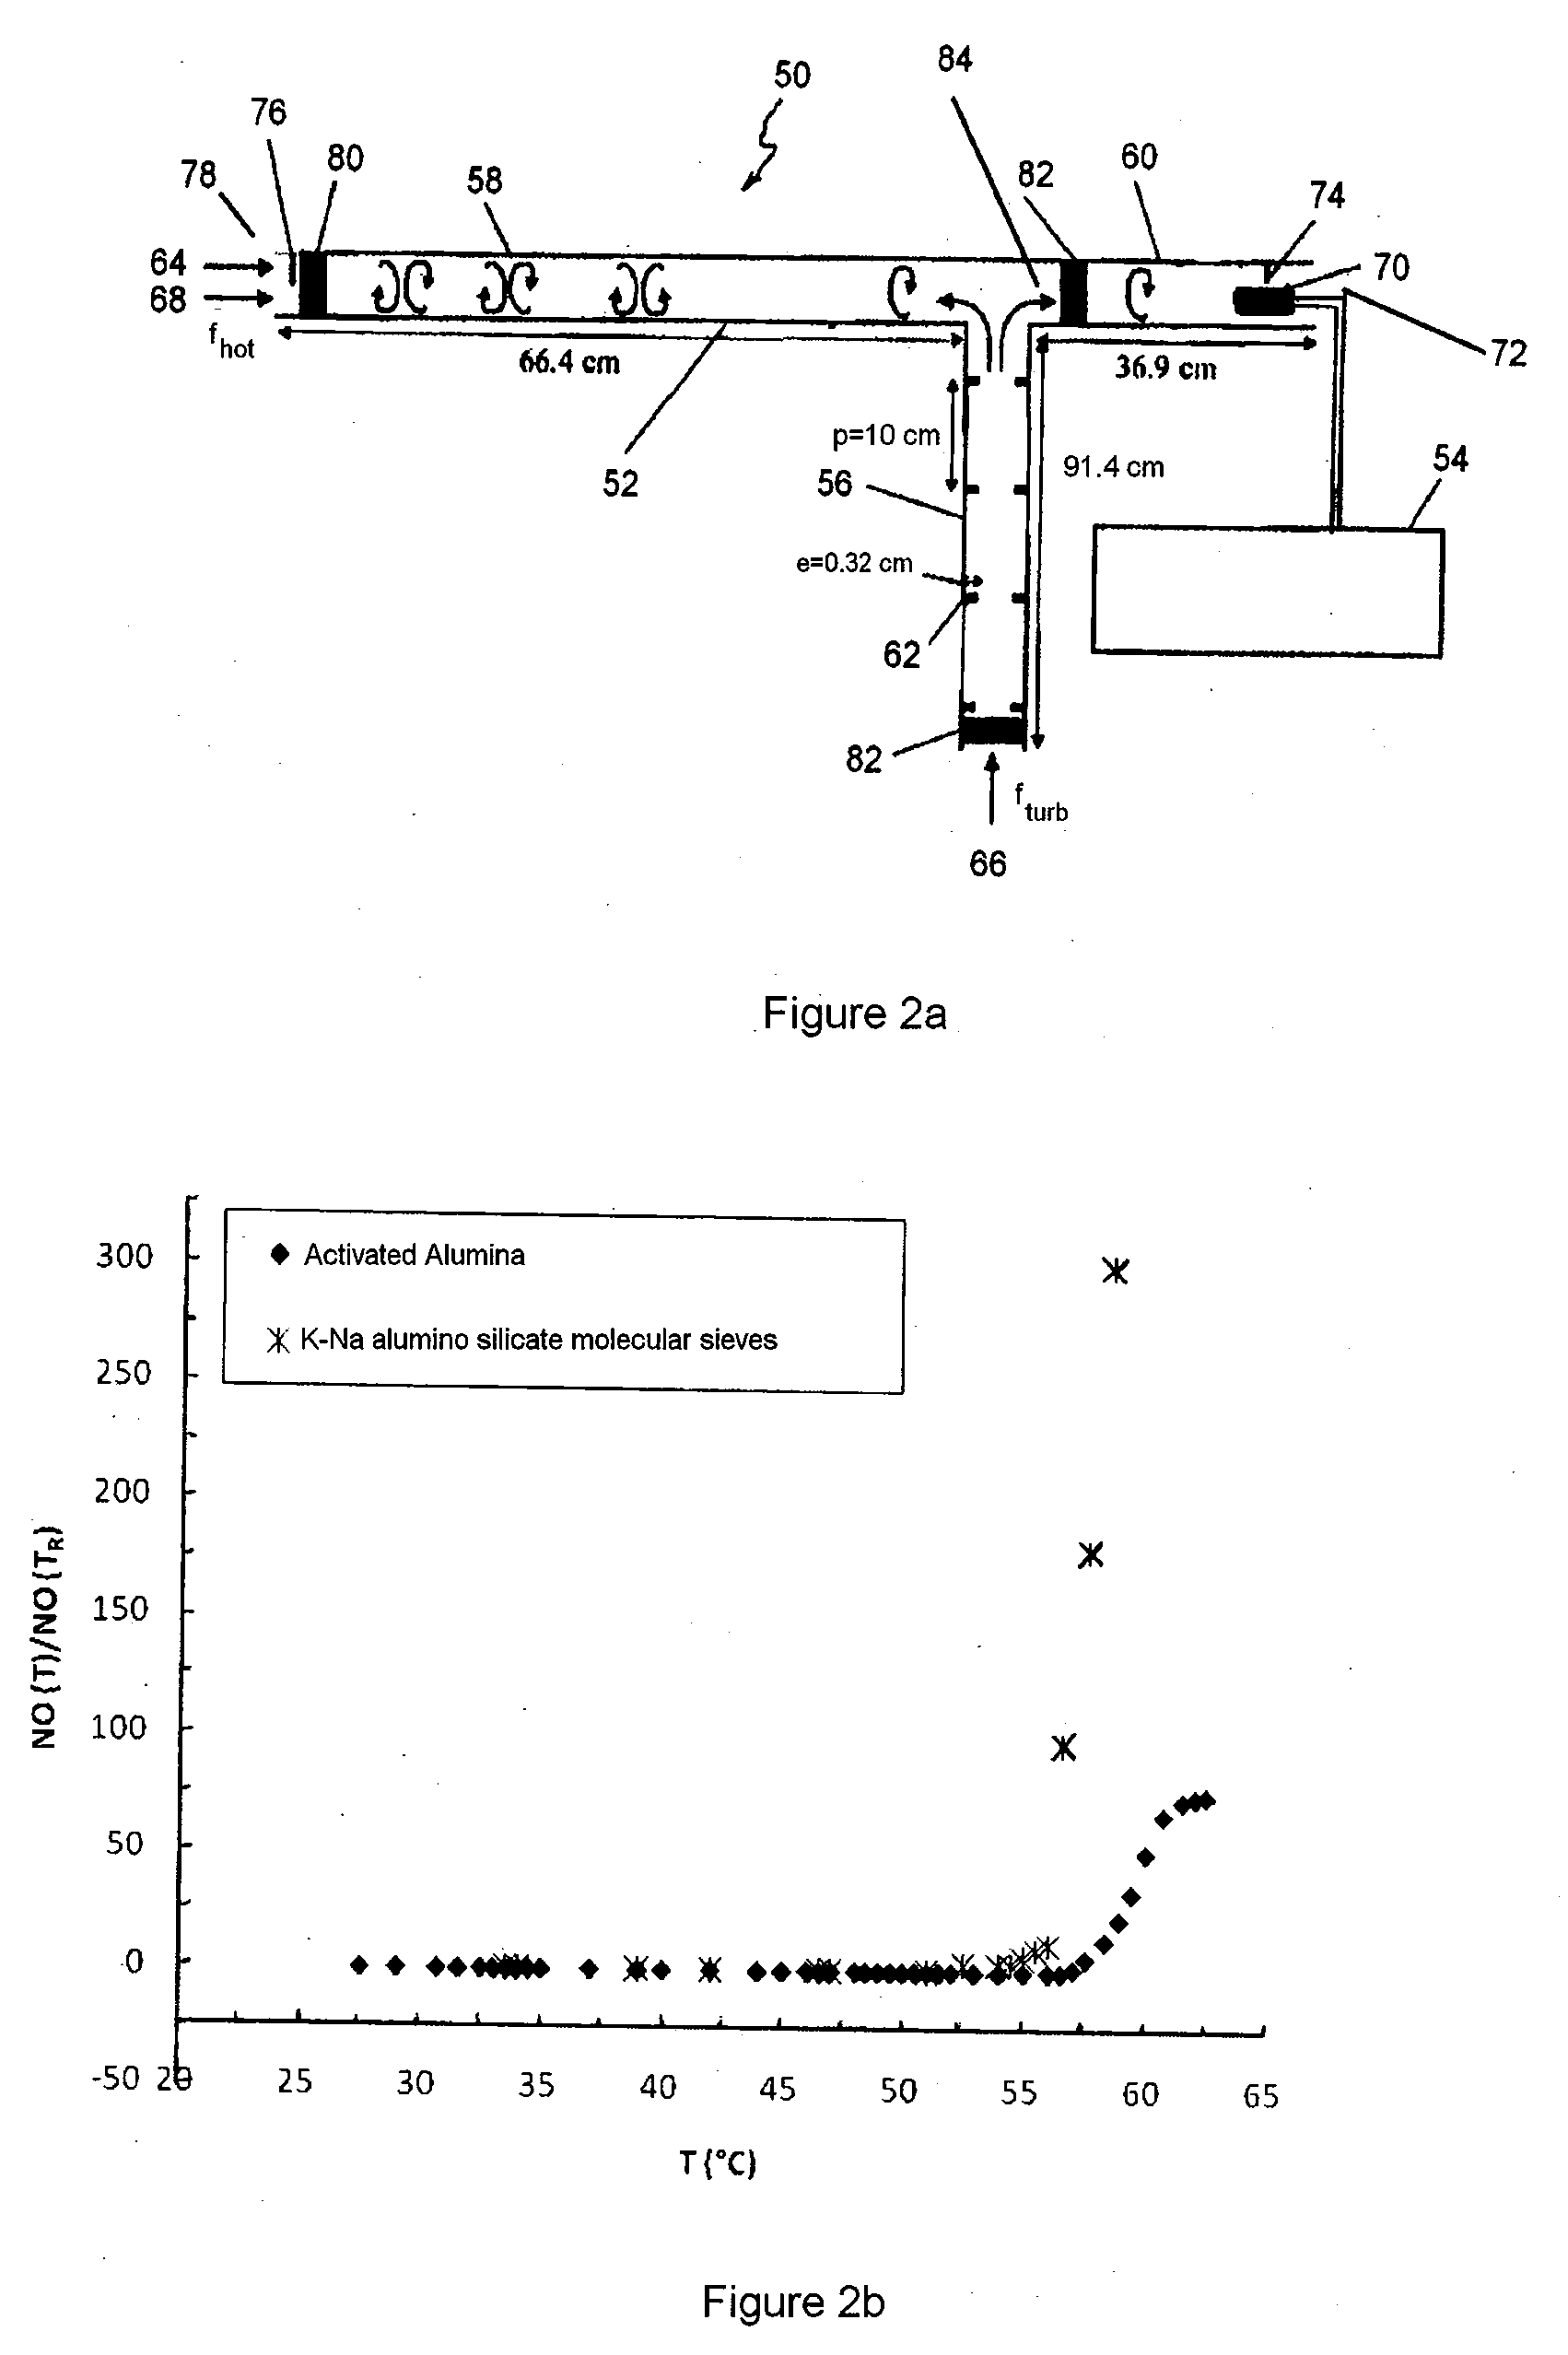 Method and System for Adsorbing Pollutants and/or Contaminants